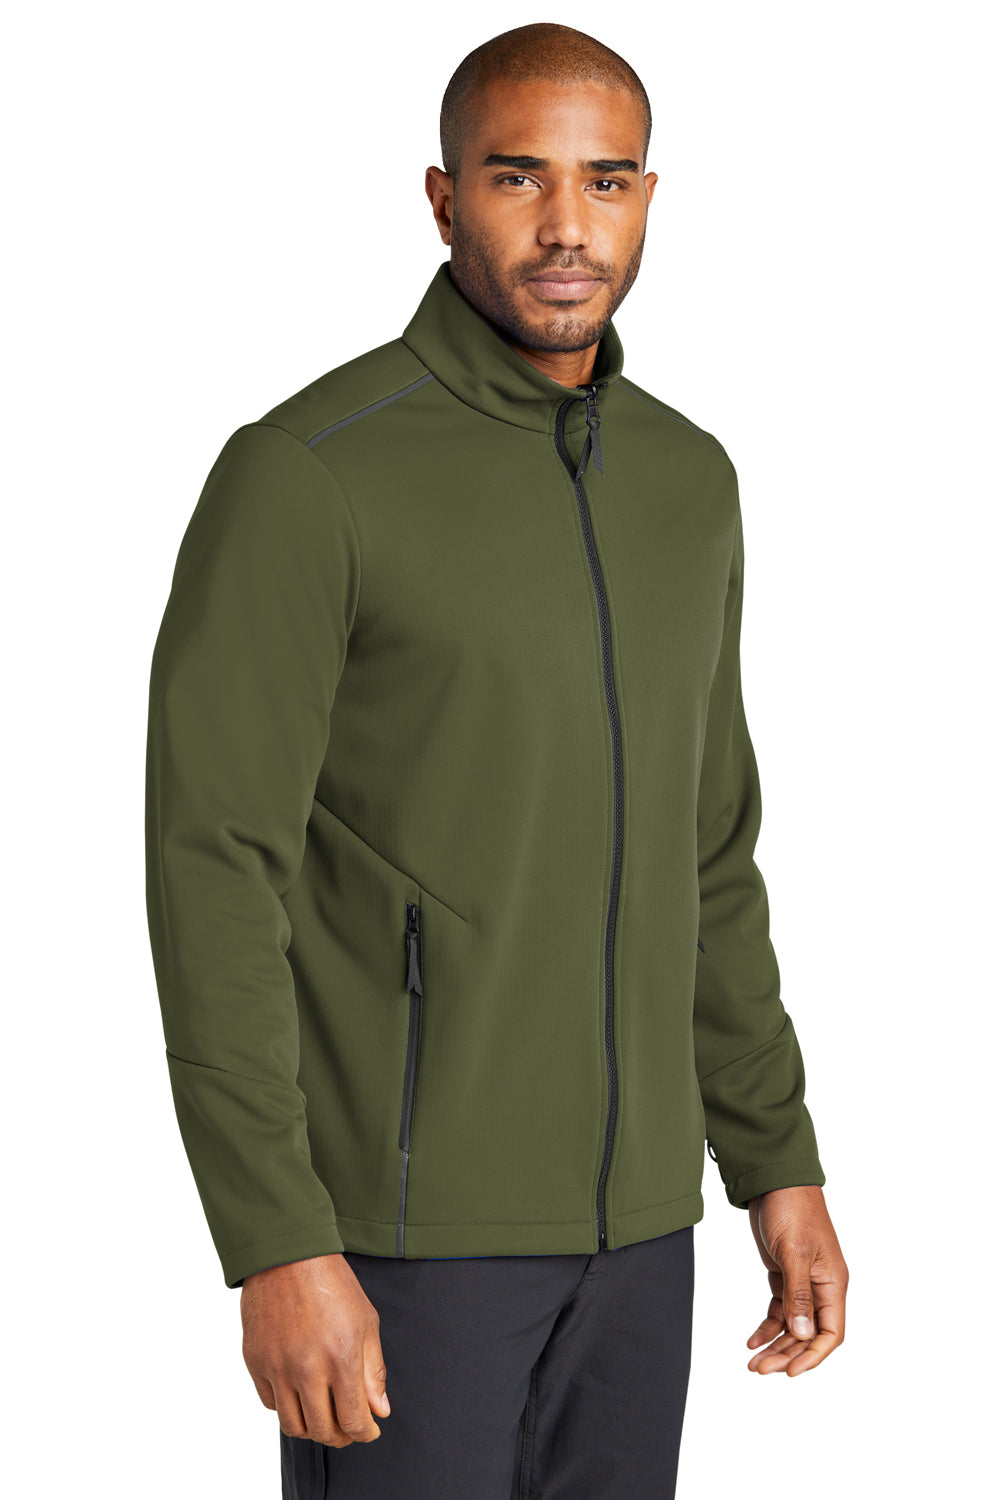 Port Authority J921 Collective Tech Full Zip Soft Shell Jacket Olive Green 3Q